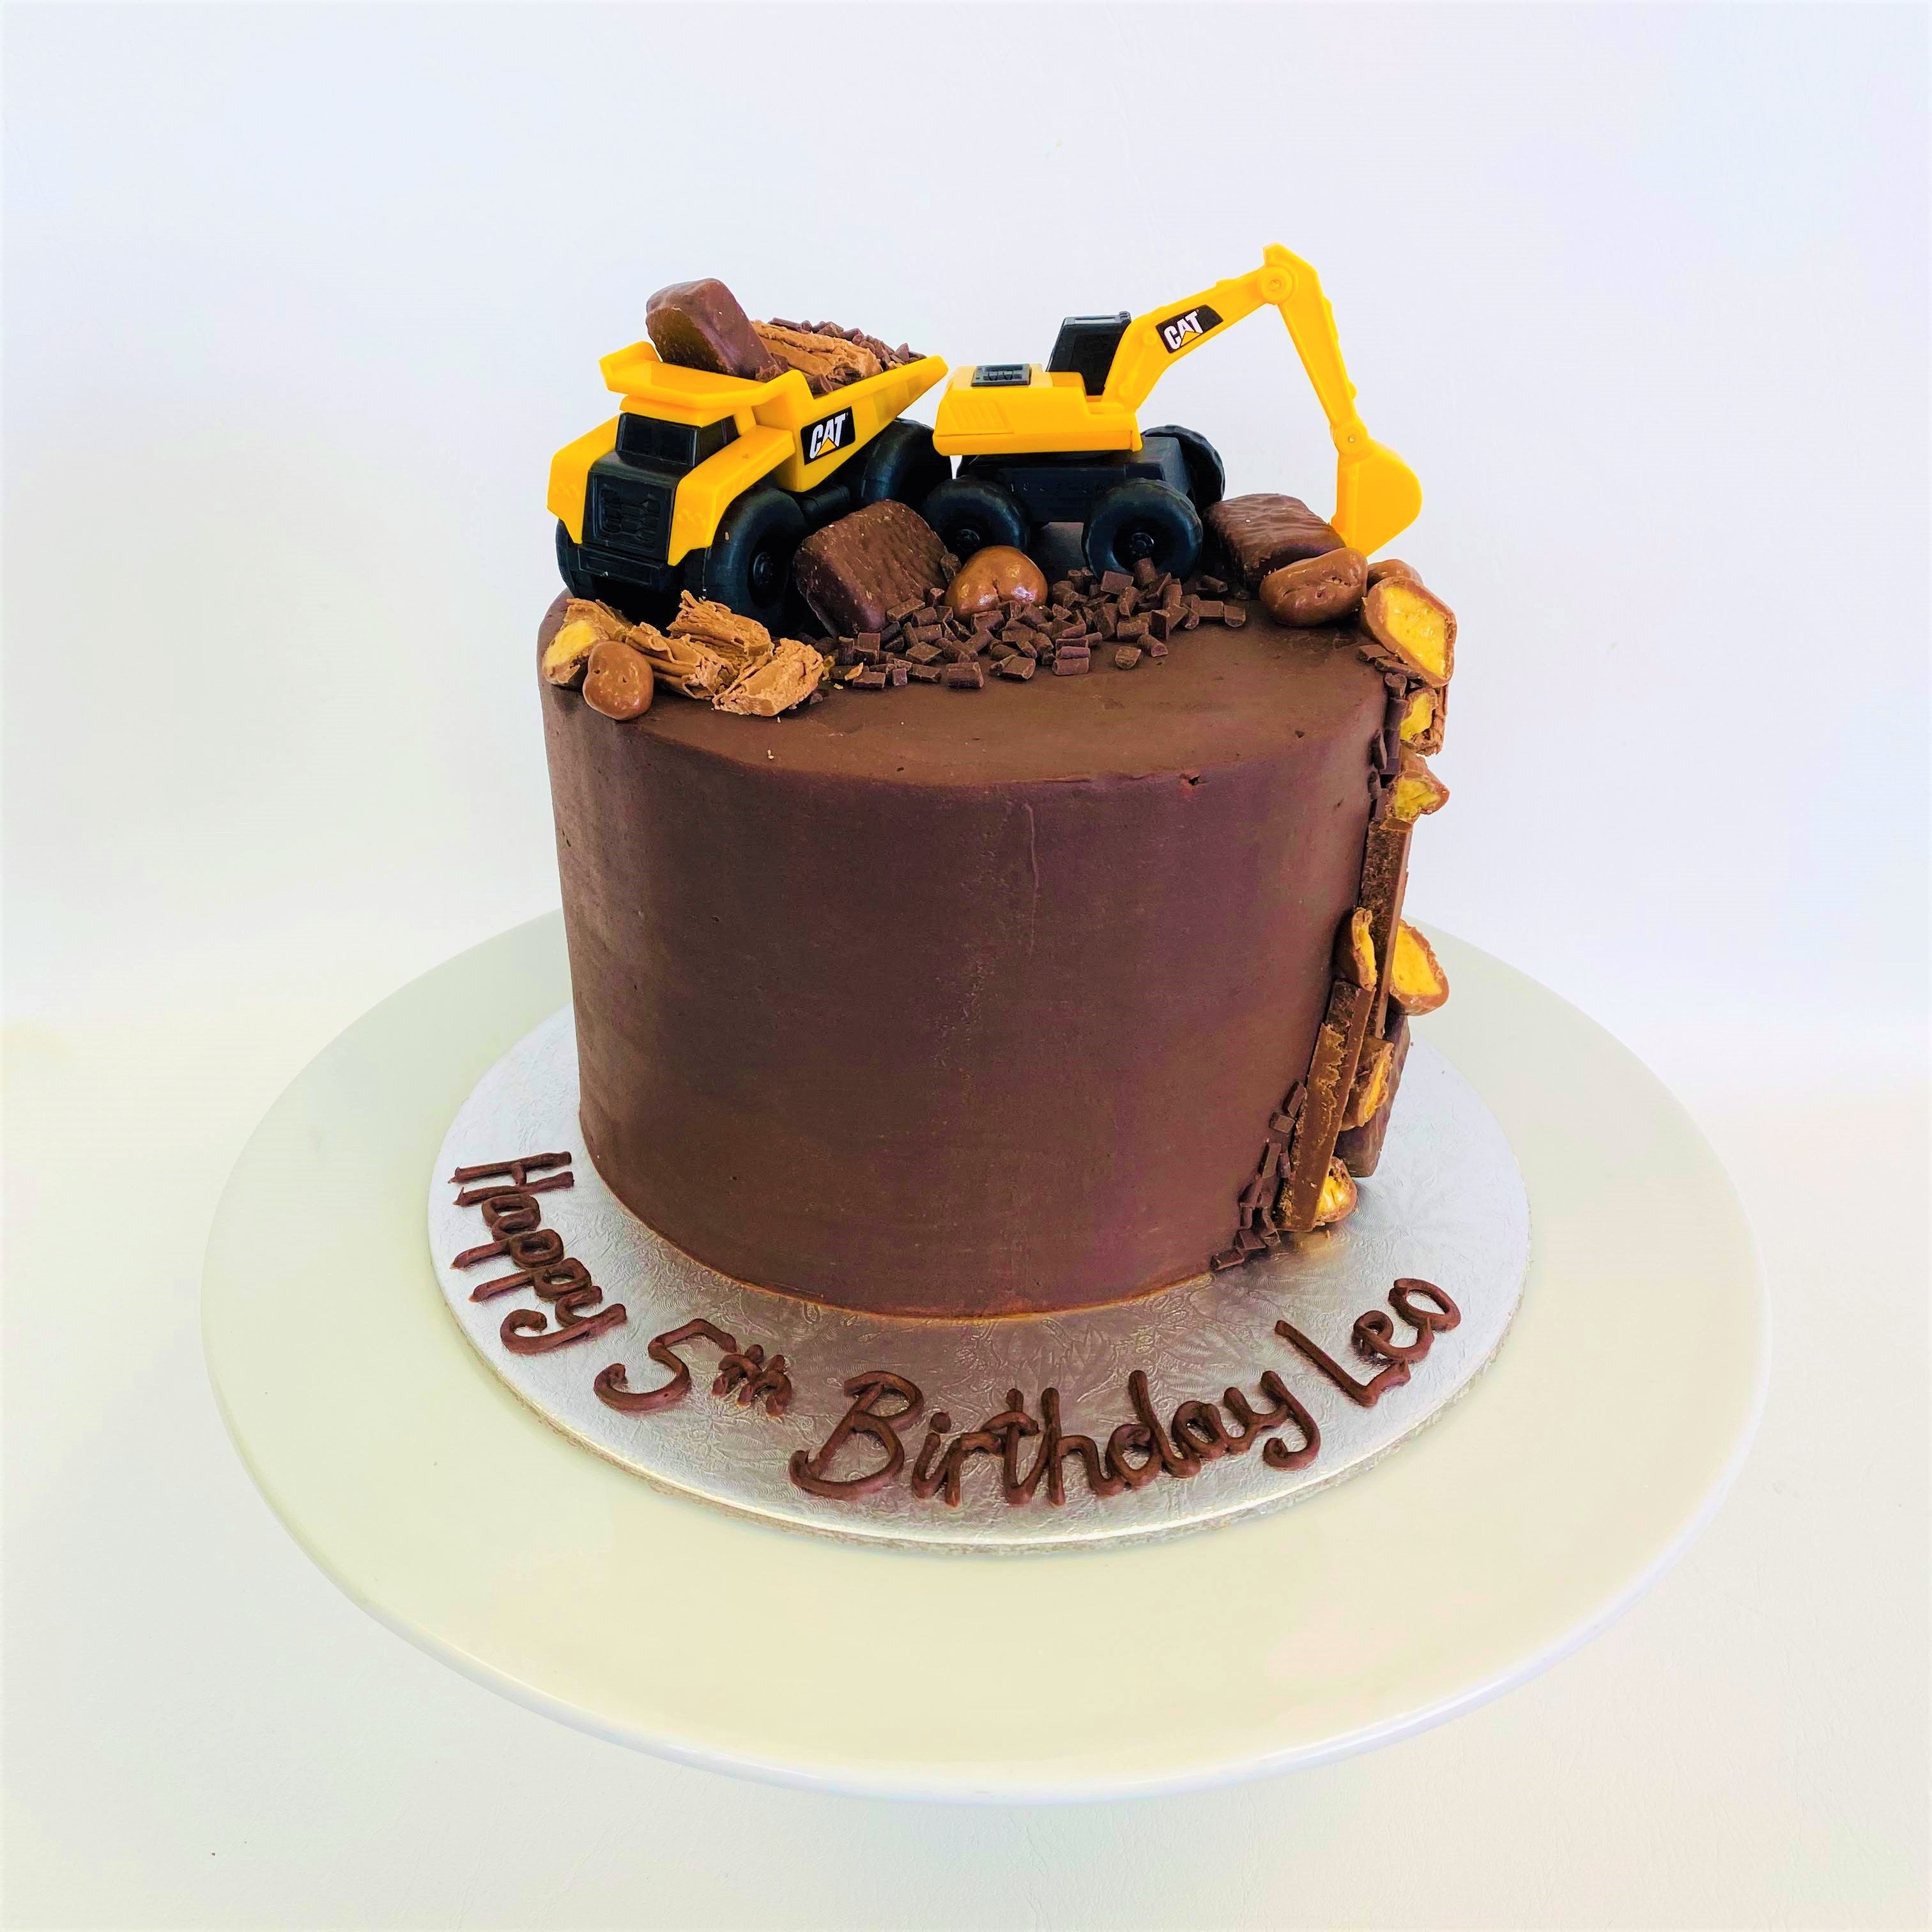 How To Make A Digger Excavator Birthday Cake - YouTube